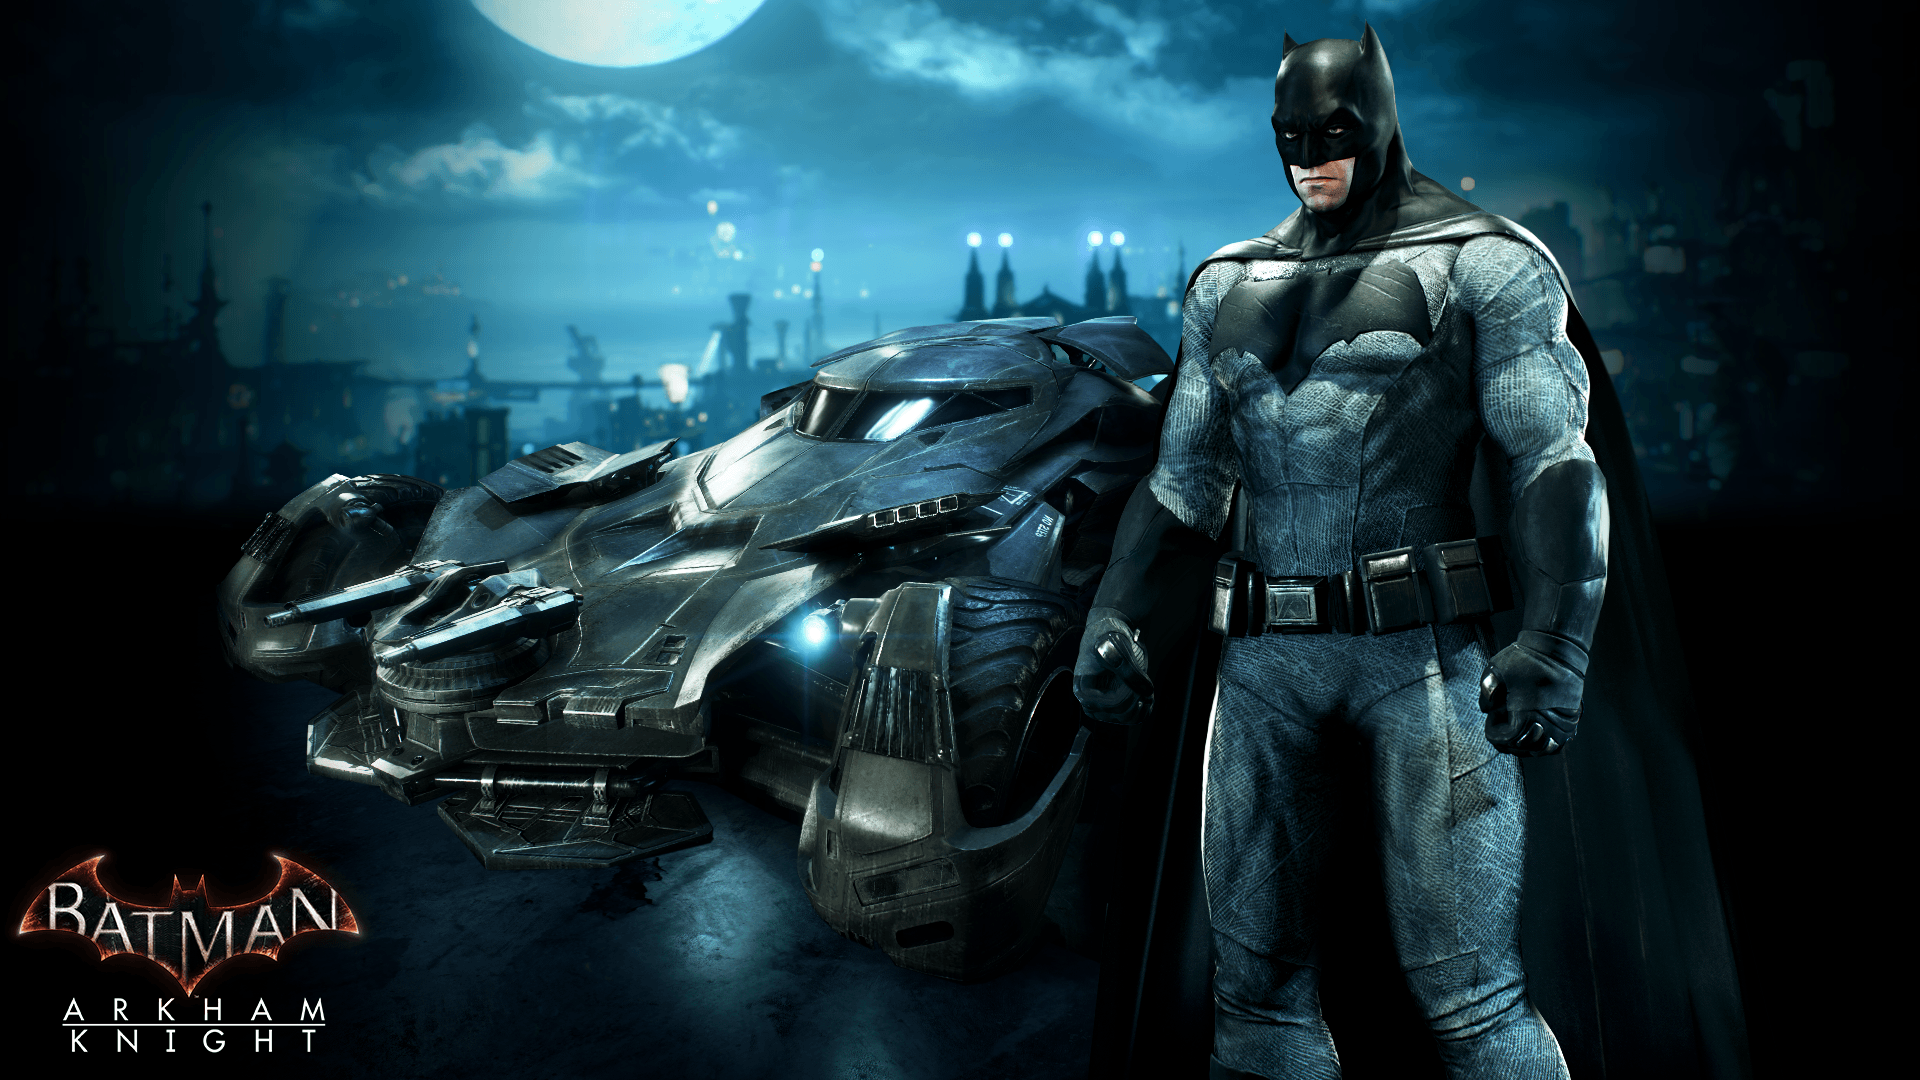 Ben Affleck's Costume And Batmobile Are Coming Next